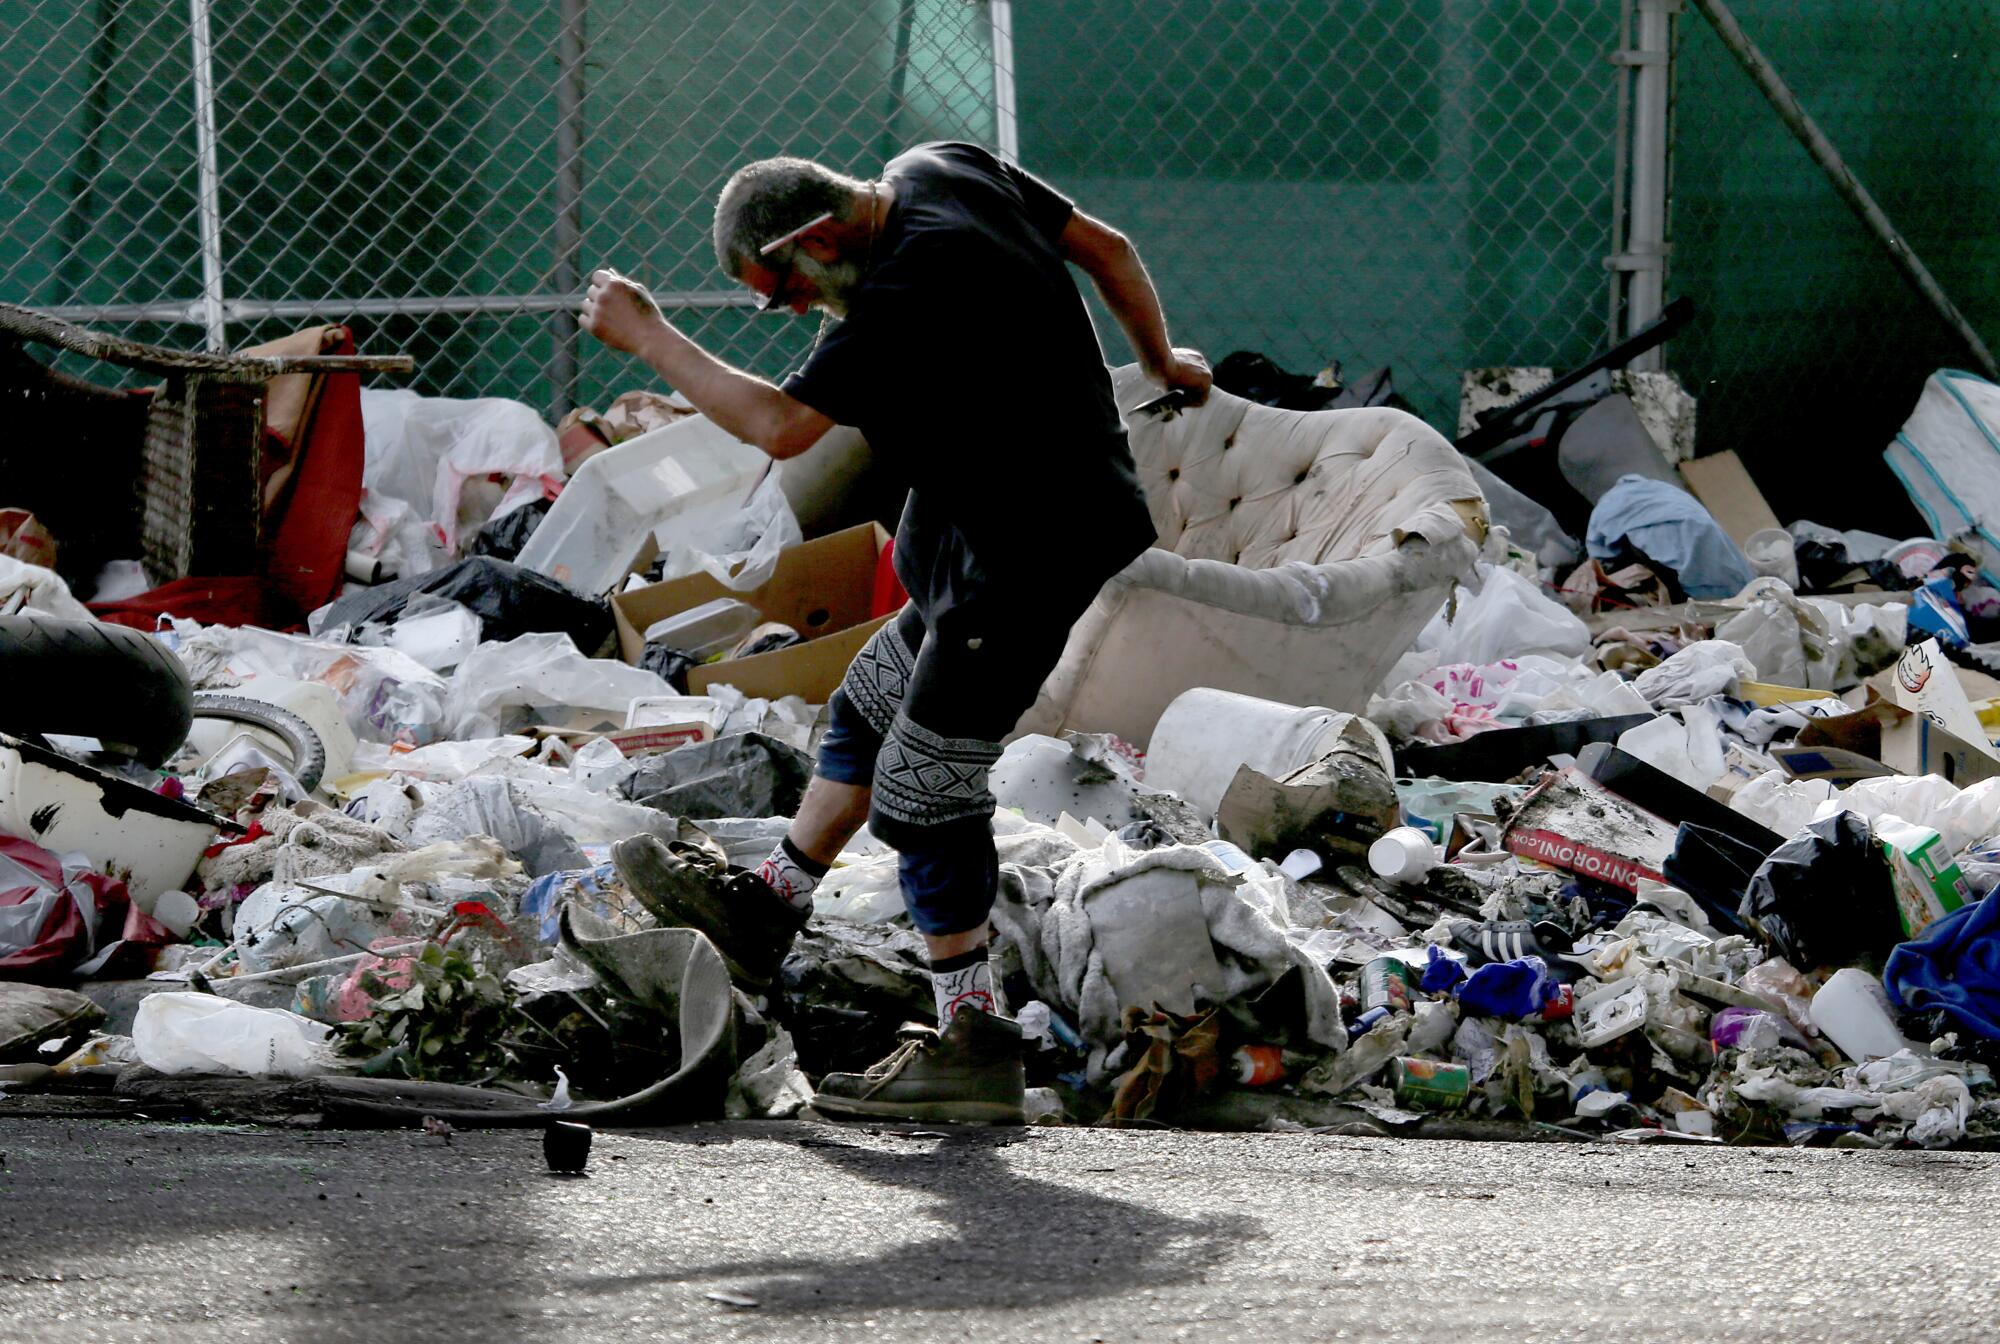 A man lifts his arms and kicks up a foot near a ripped-up couch and other trash piled against a chain-link fence.